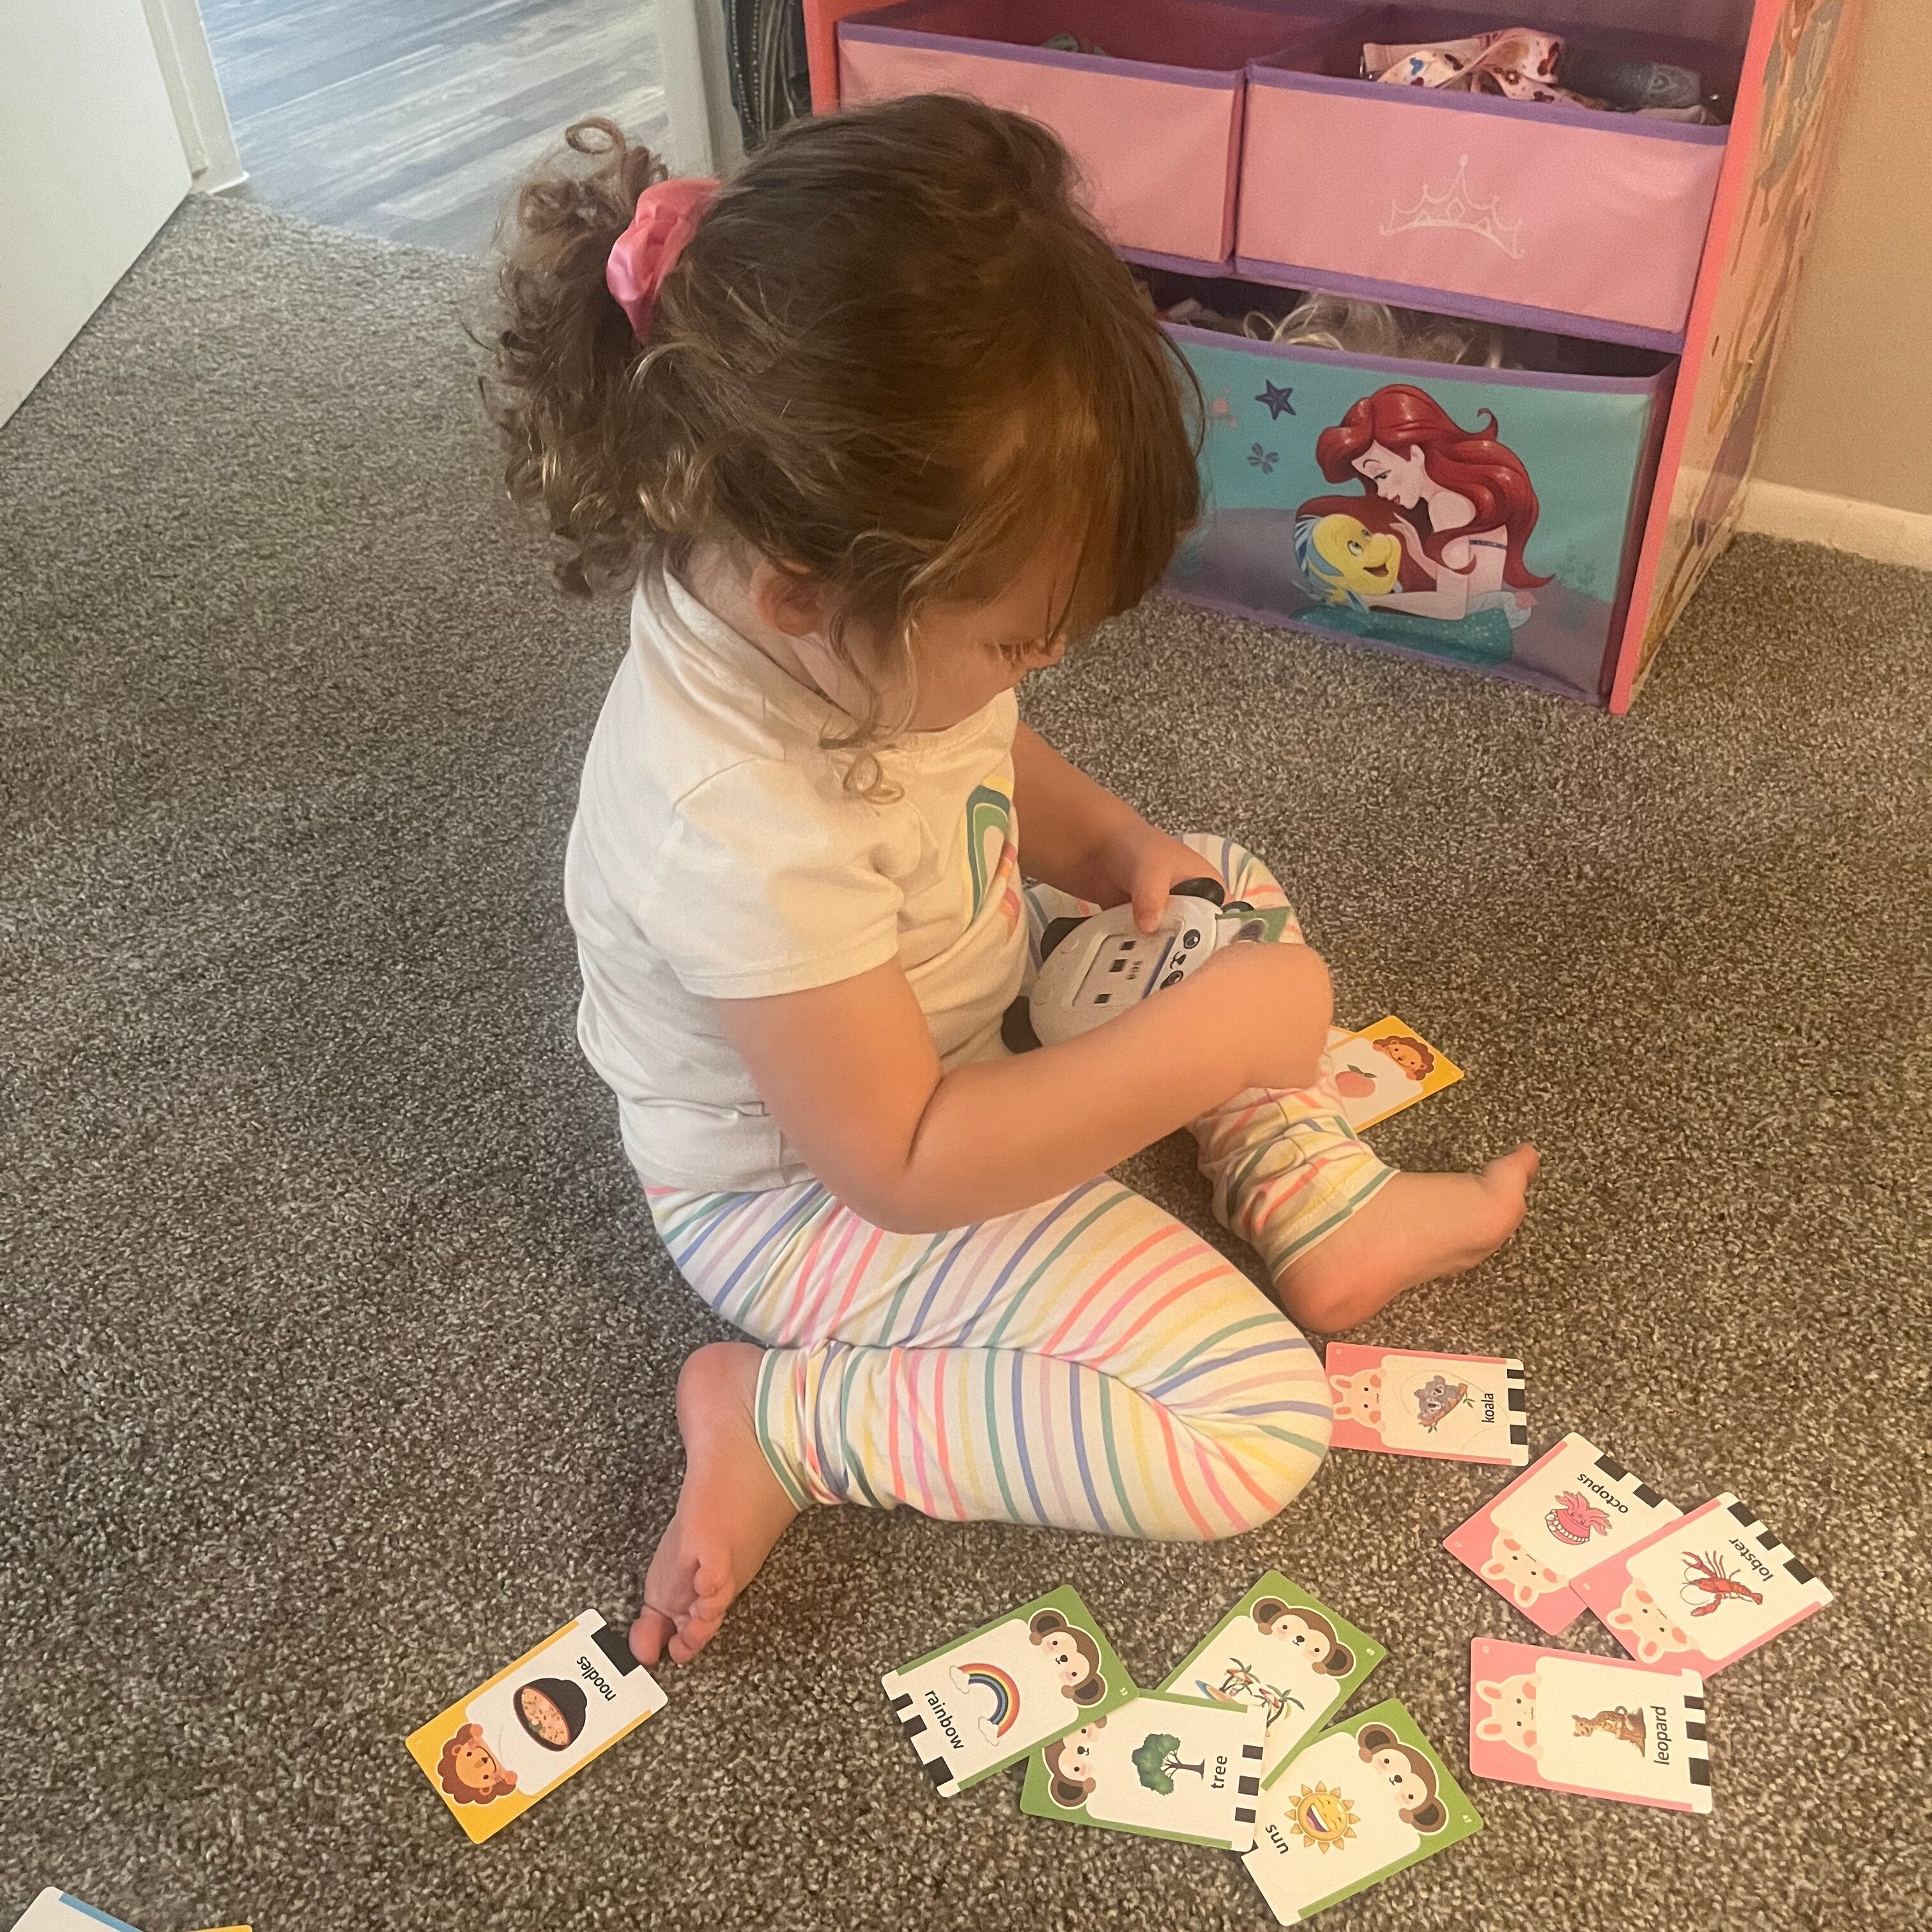 Kiddospace Talking Cards (Includes 144 Cards)